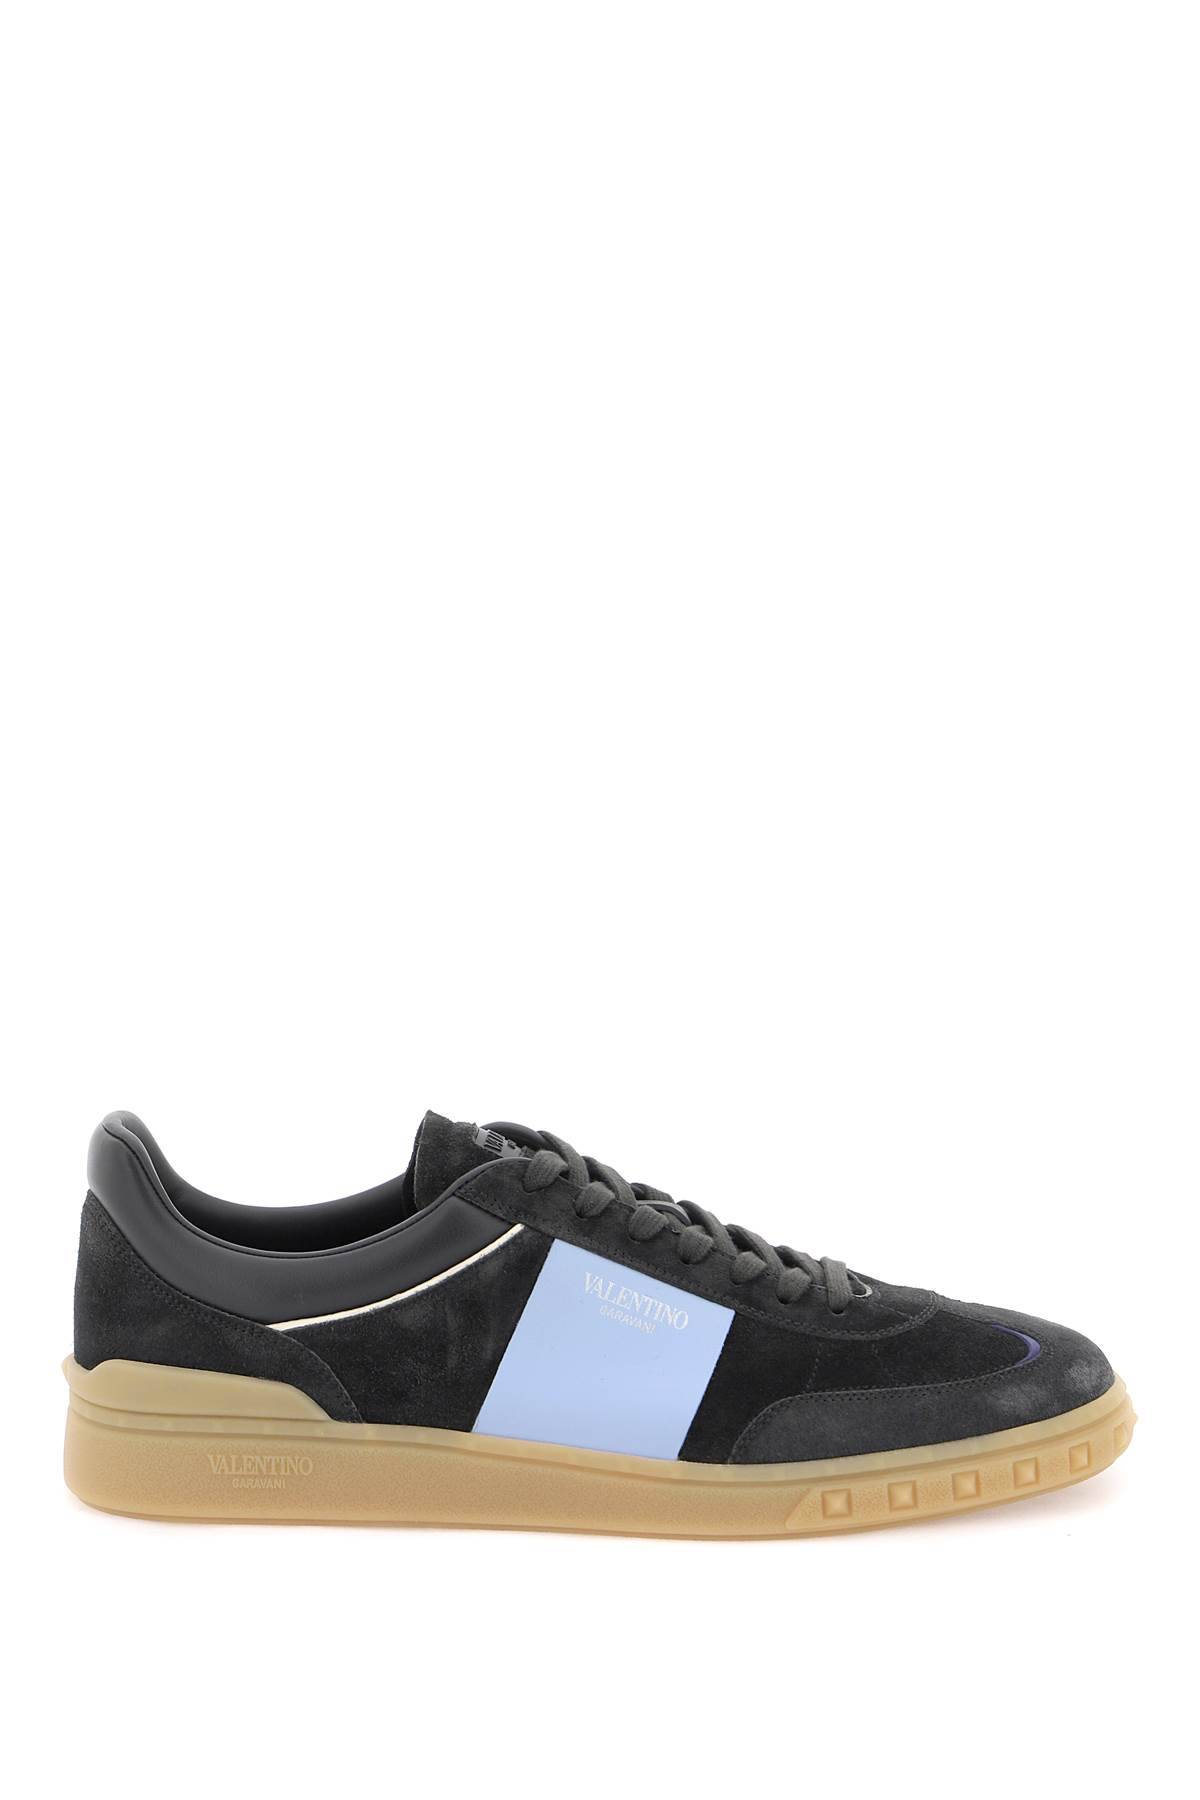 Shop Valentino Low Top Upvillage Sneakers In Black,light Blue